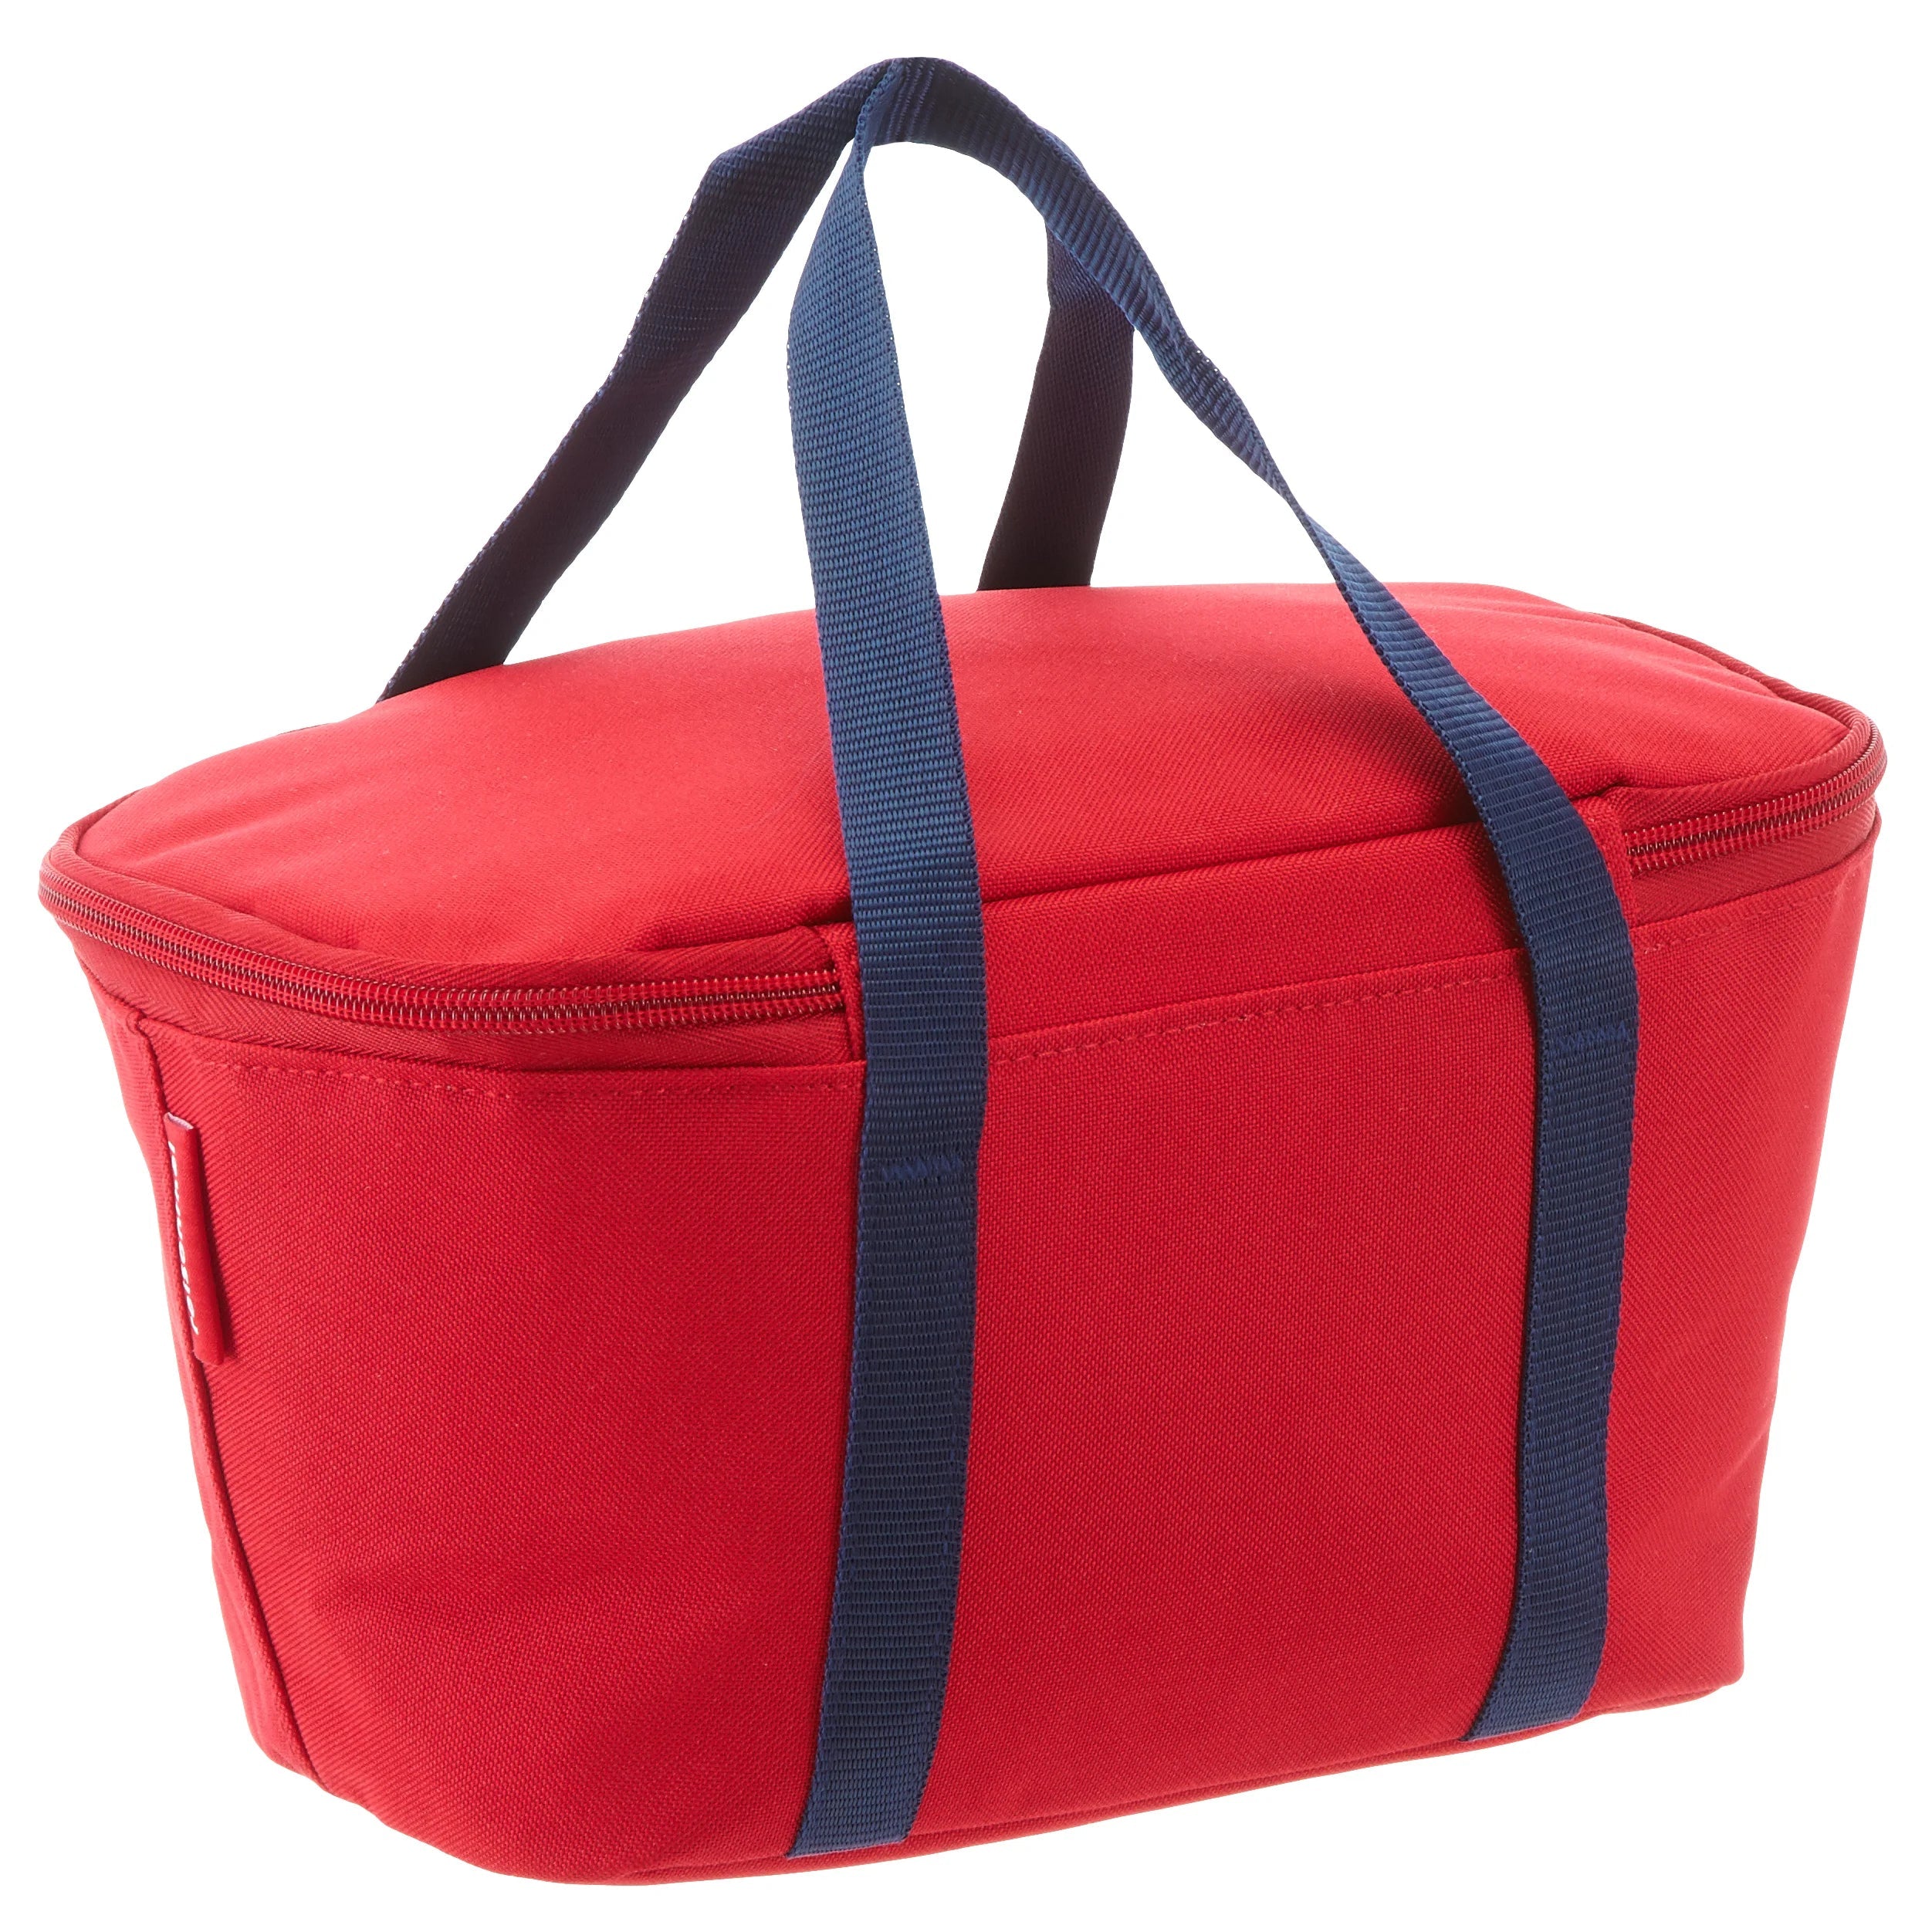 Reisenthel Shopping Sac isotherme XS 27 cm - points